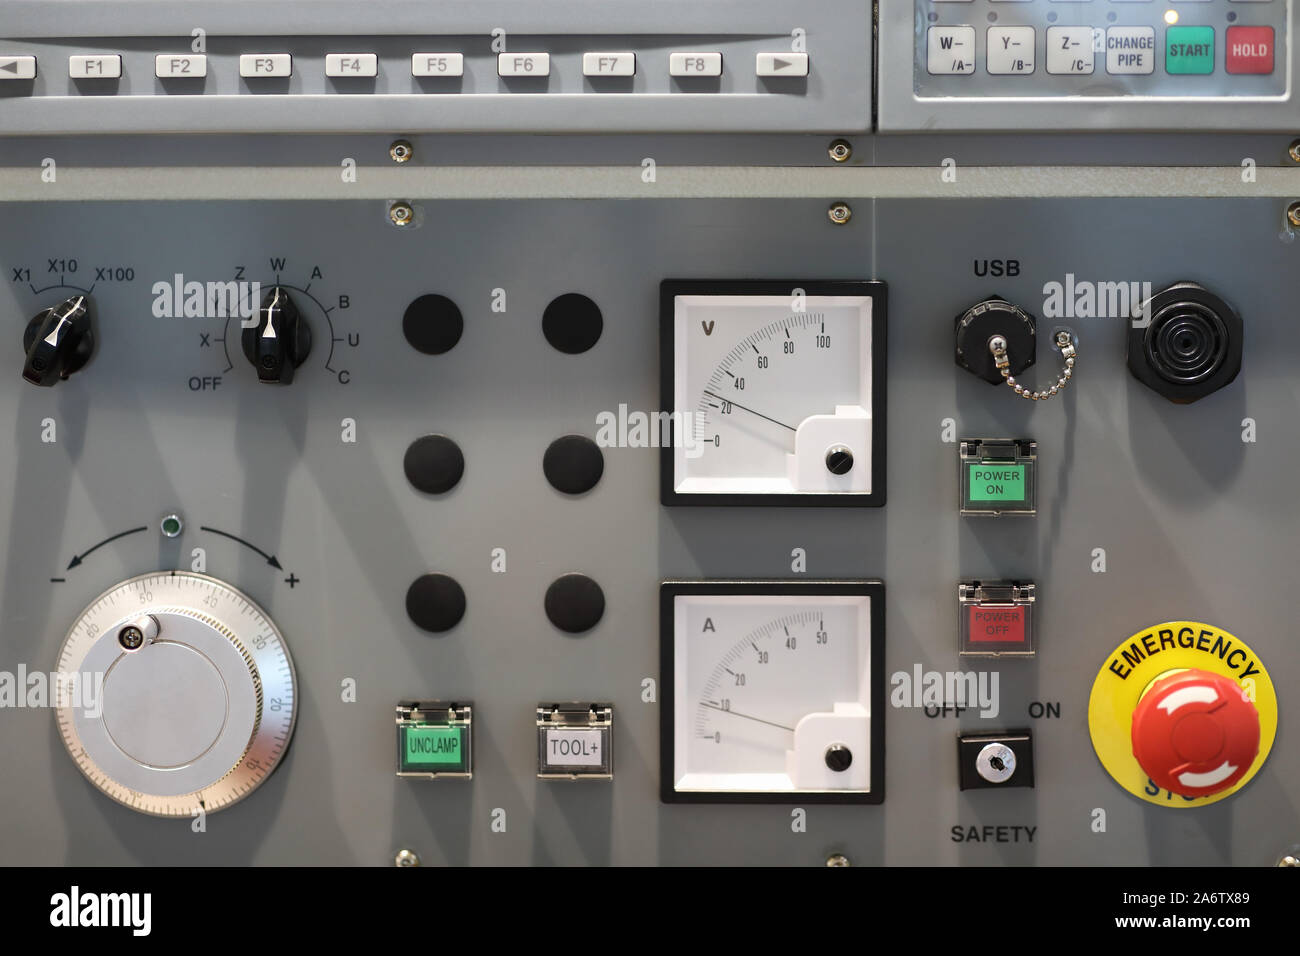 CNC machine control panel with voltmeter and ammeter. Stock Photo